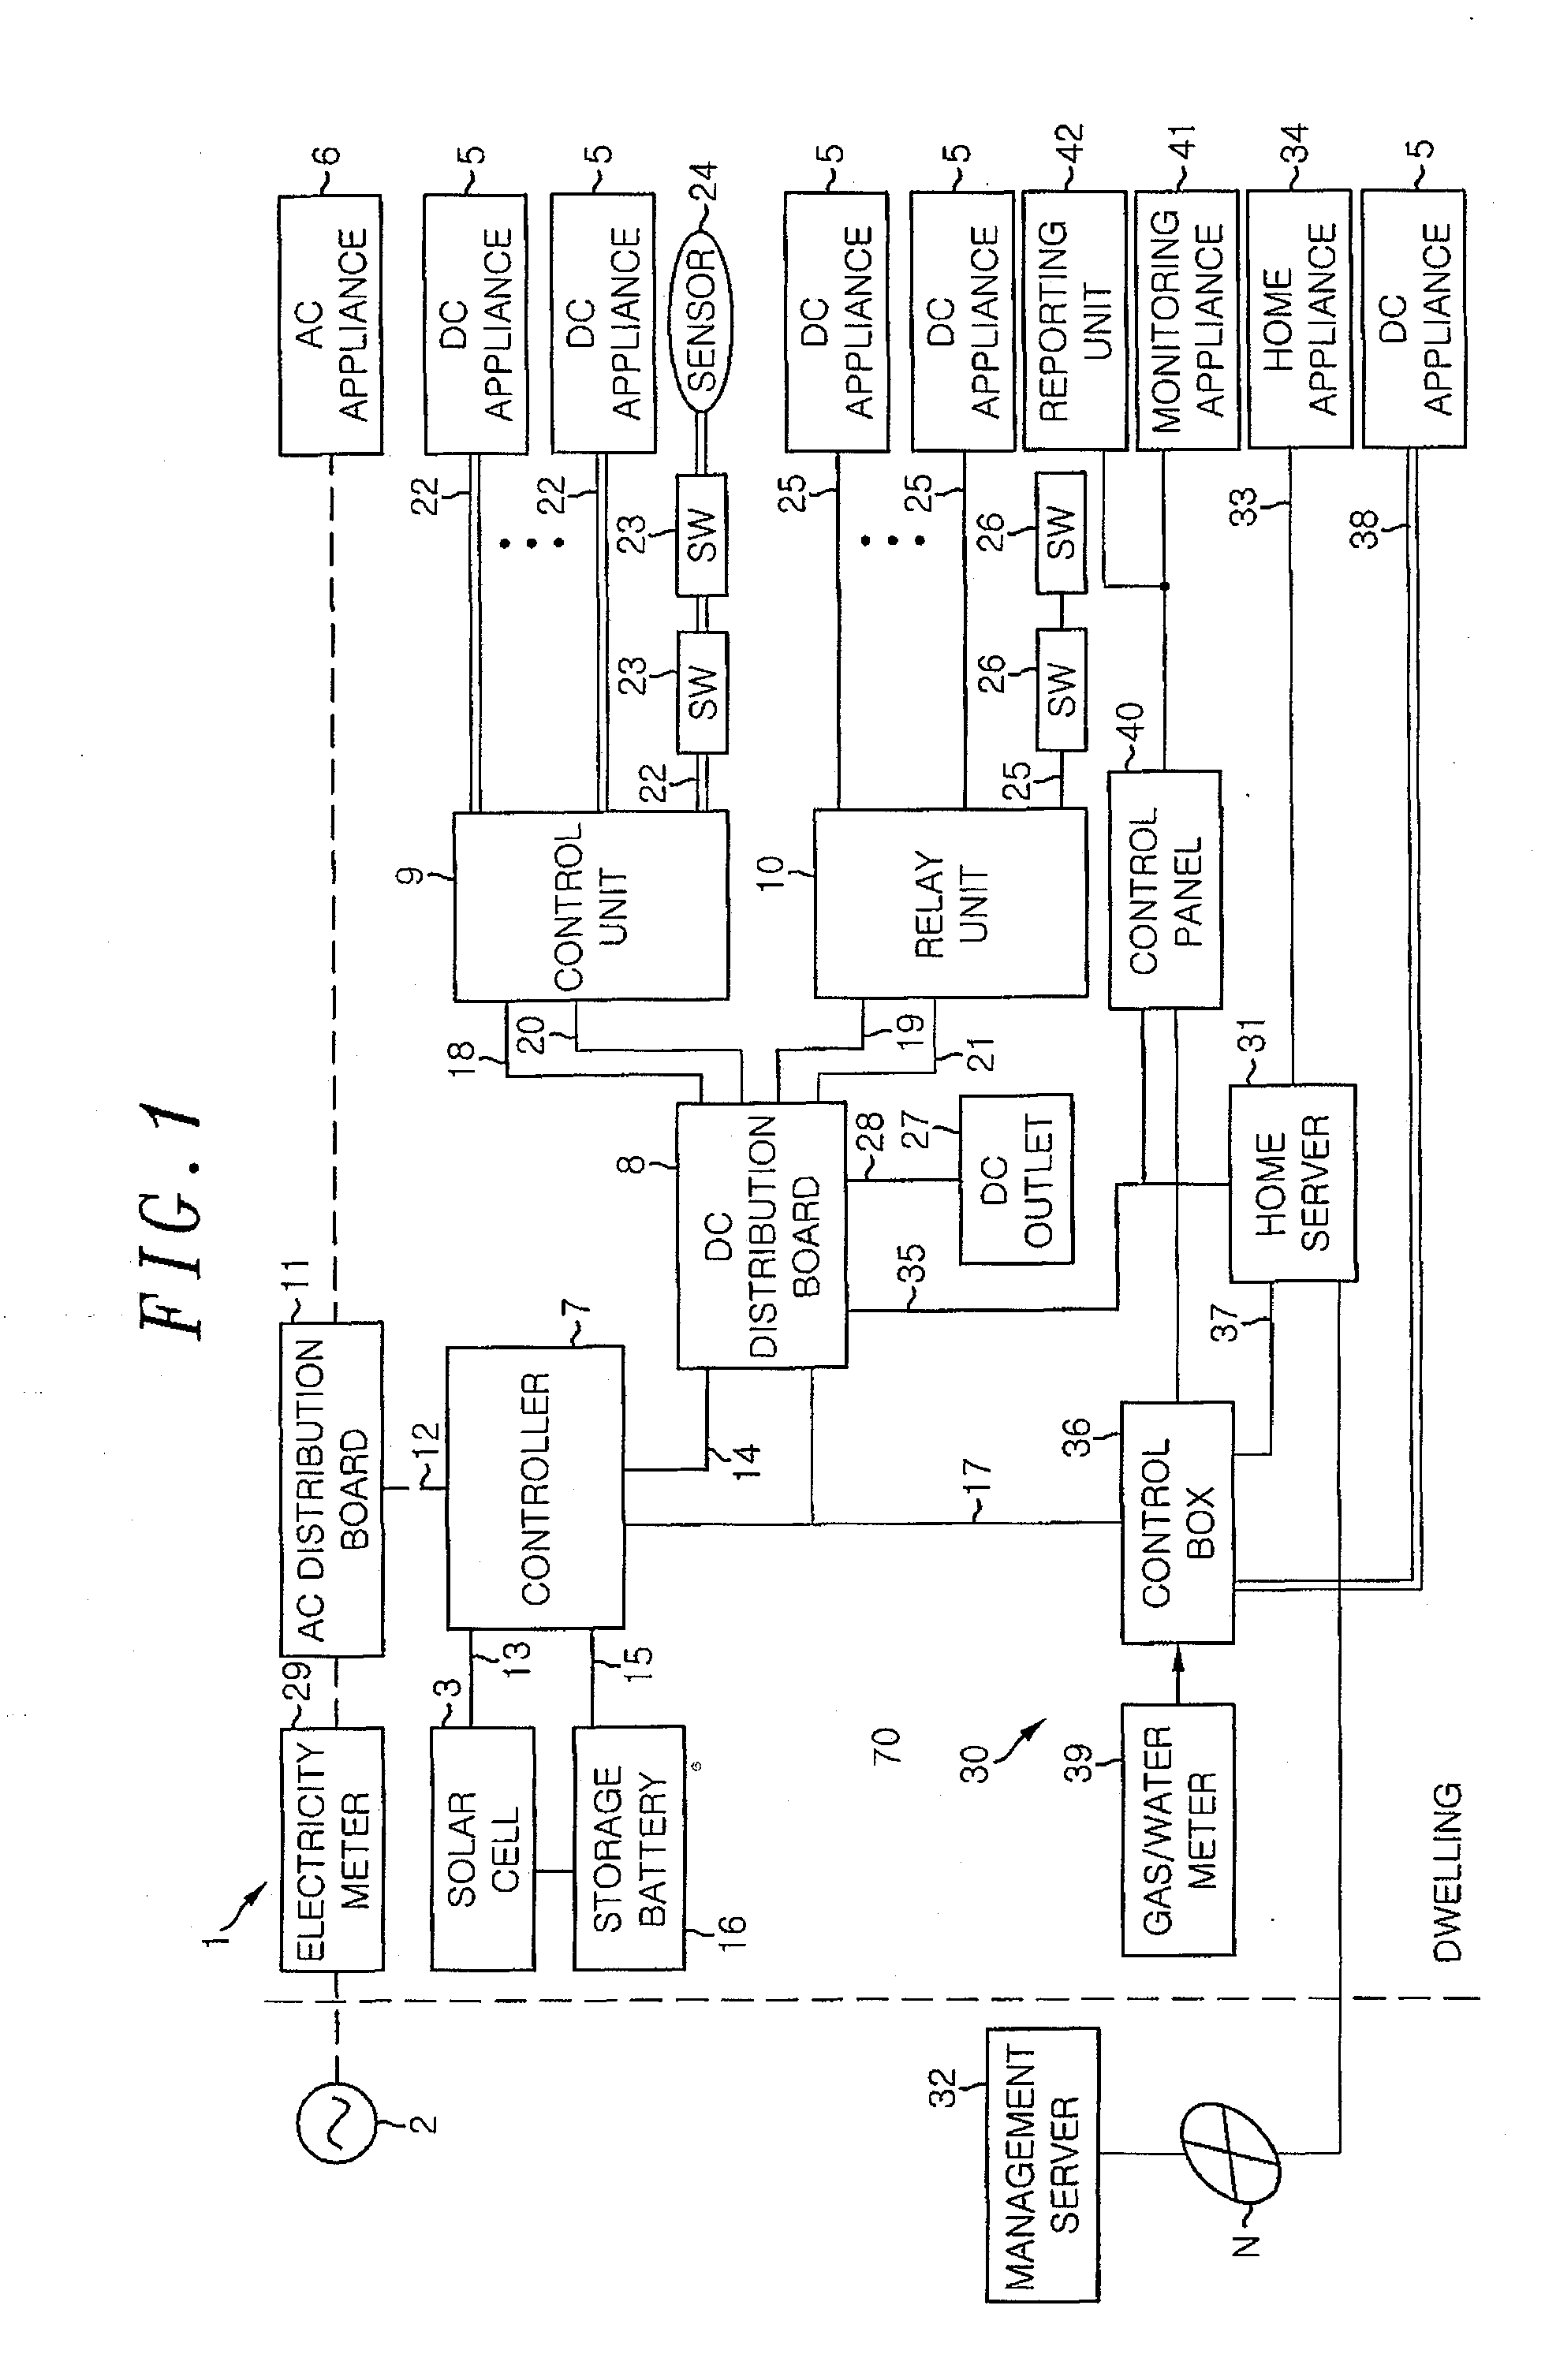 Electric power distribution system